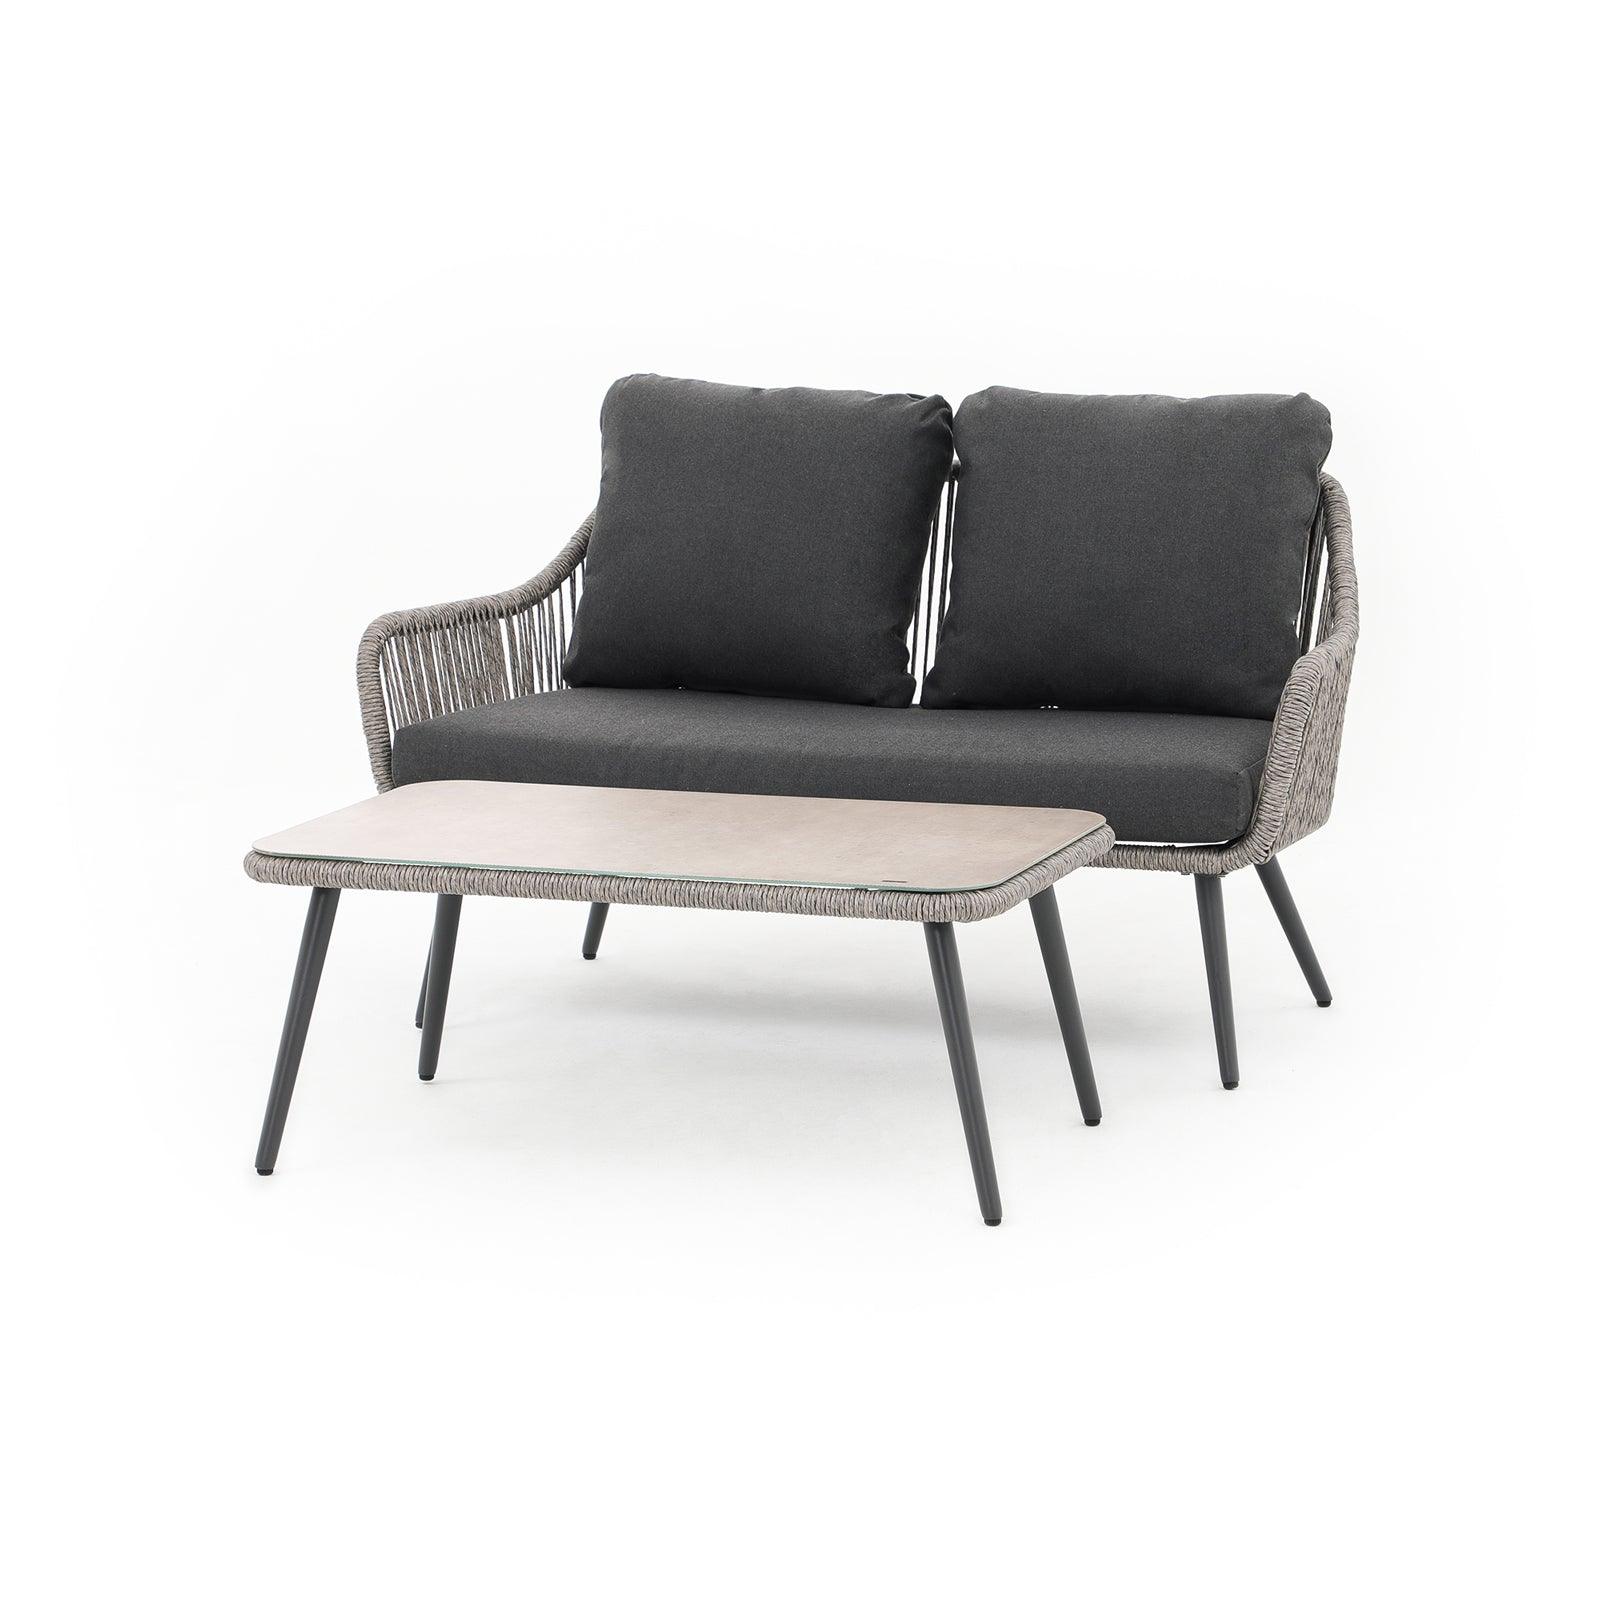 Hallerbos outdoor loveseat set with steel frame and grey twisted rattan design, 1 loveseat with dark grey cushions, 1 rectangle coffee table, side view - Jardina Furniture#Color_Grey